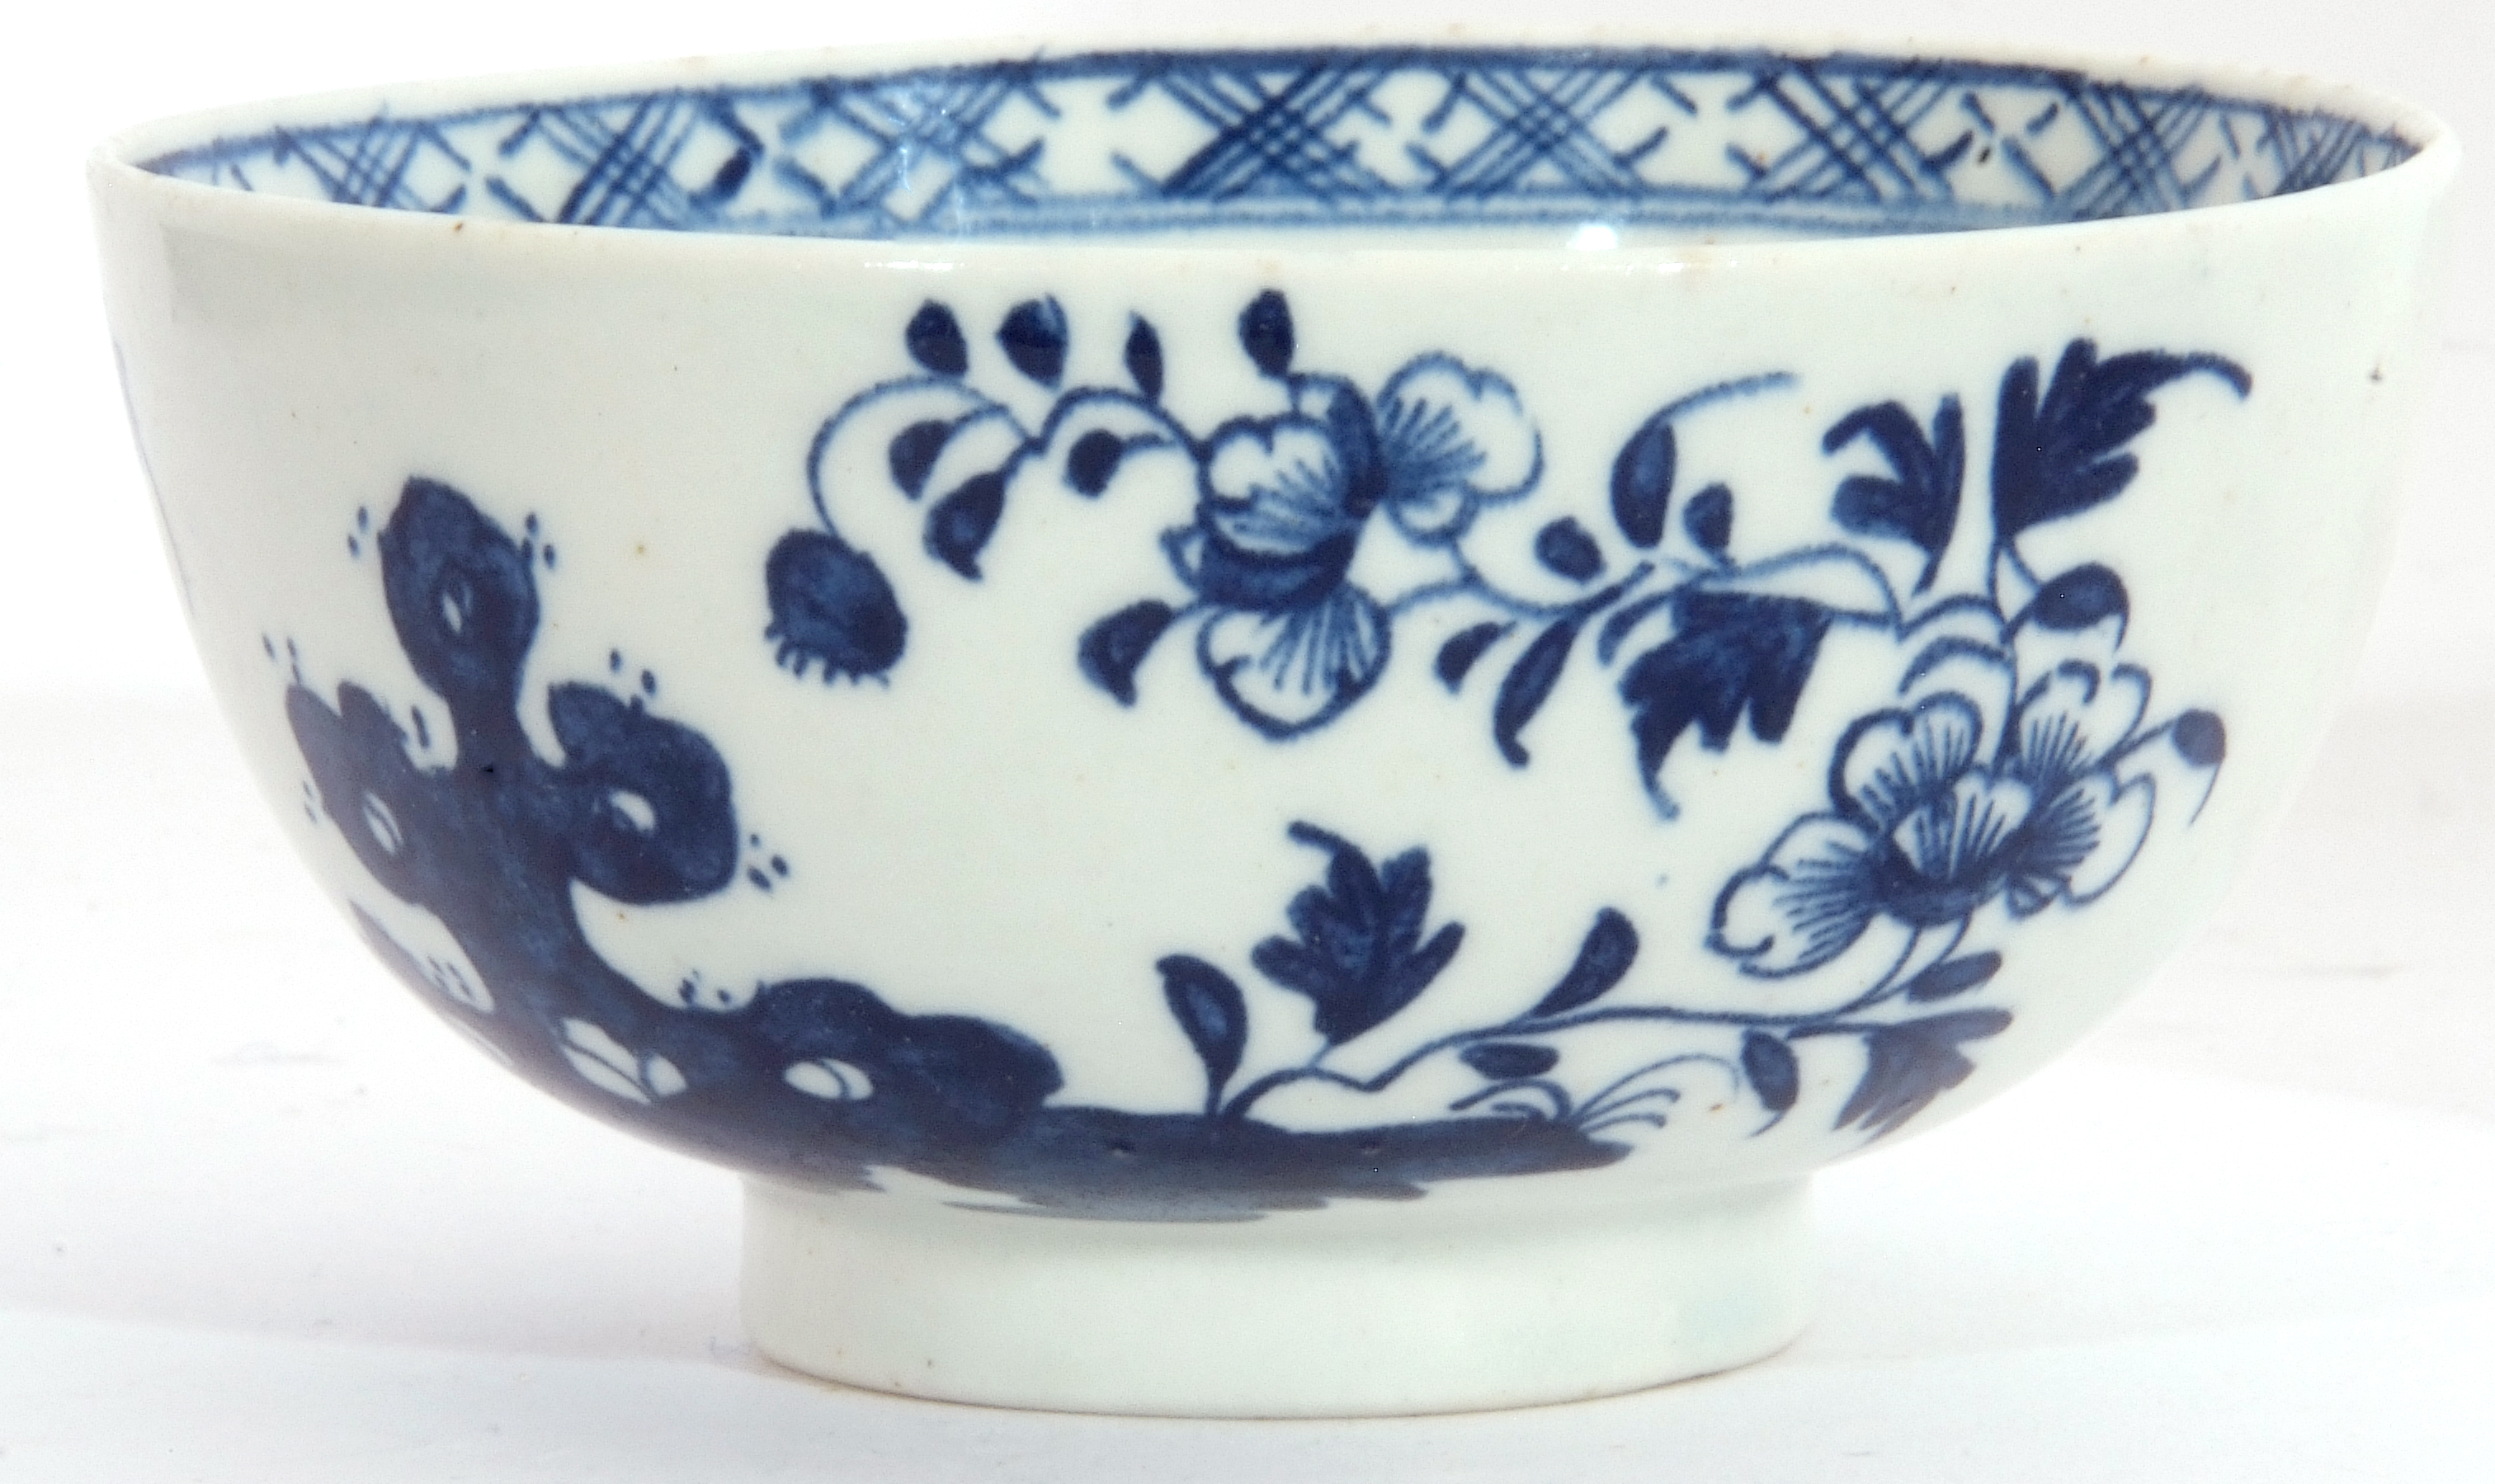 Large Lowestoft porcelain tea bowl and saucer decorated in underglaze blue with flowers and rock - Image 5 of 9